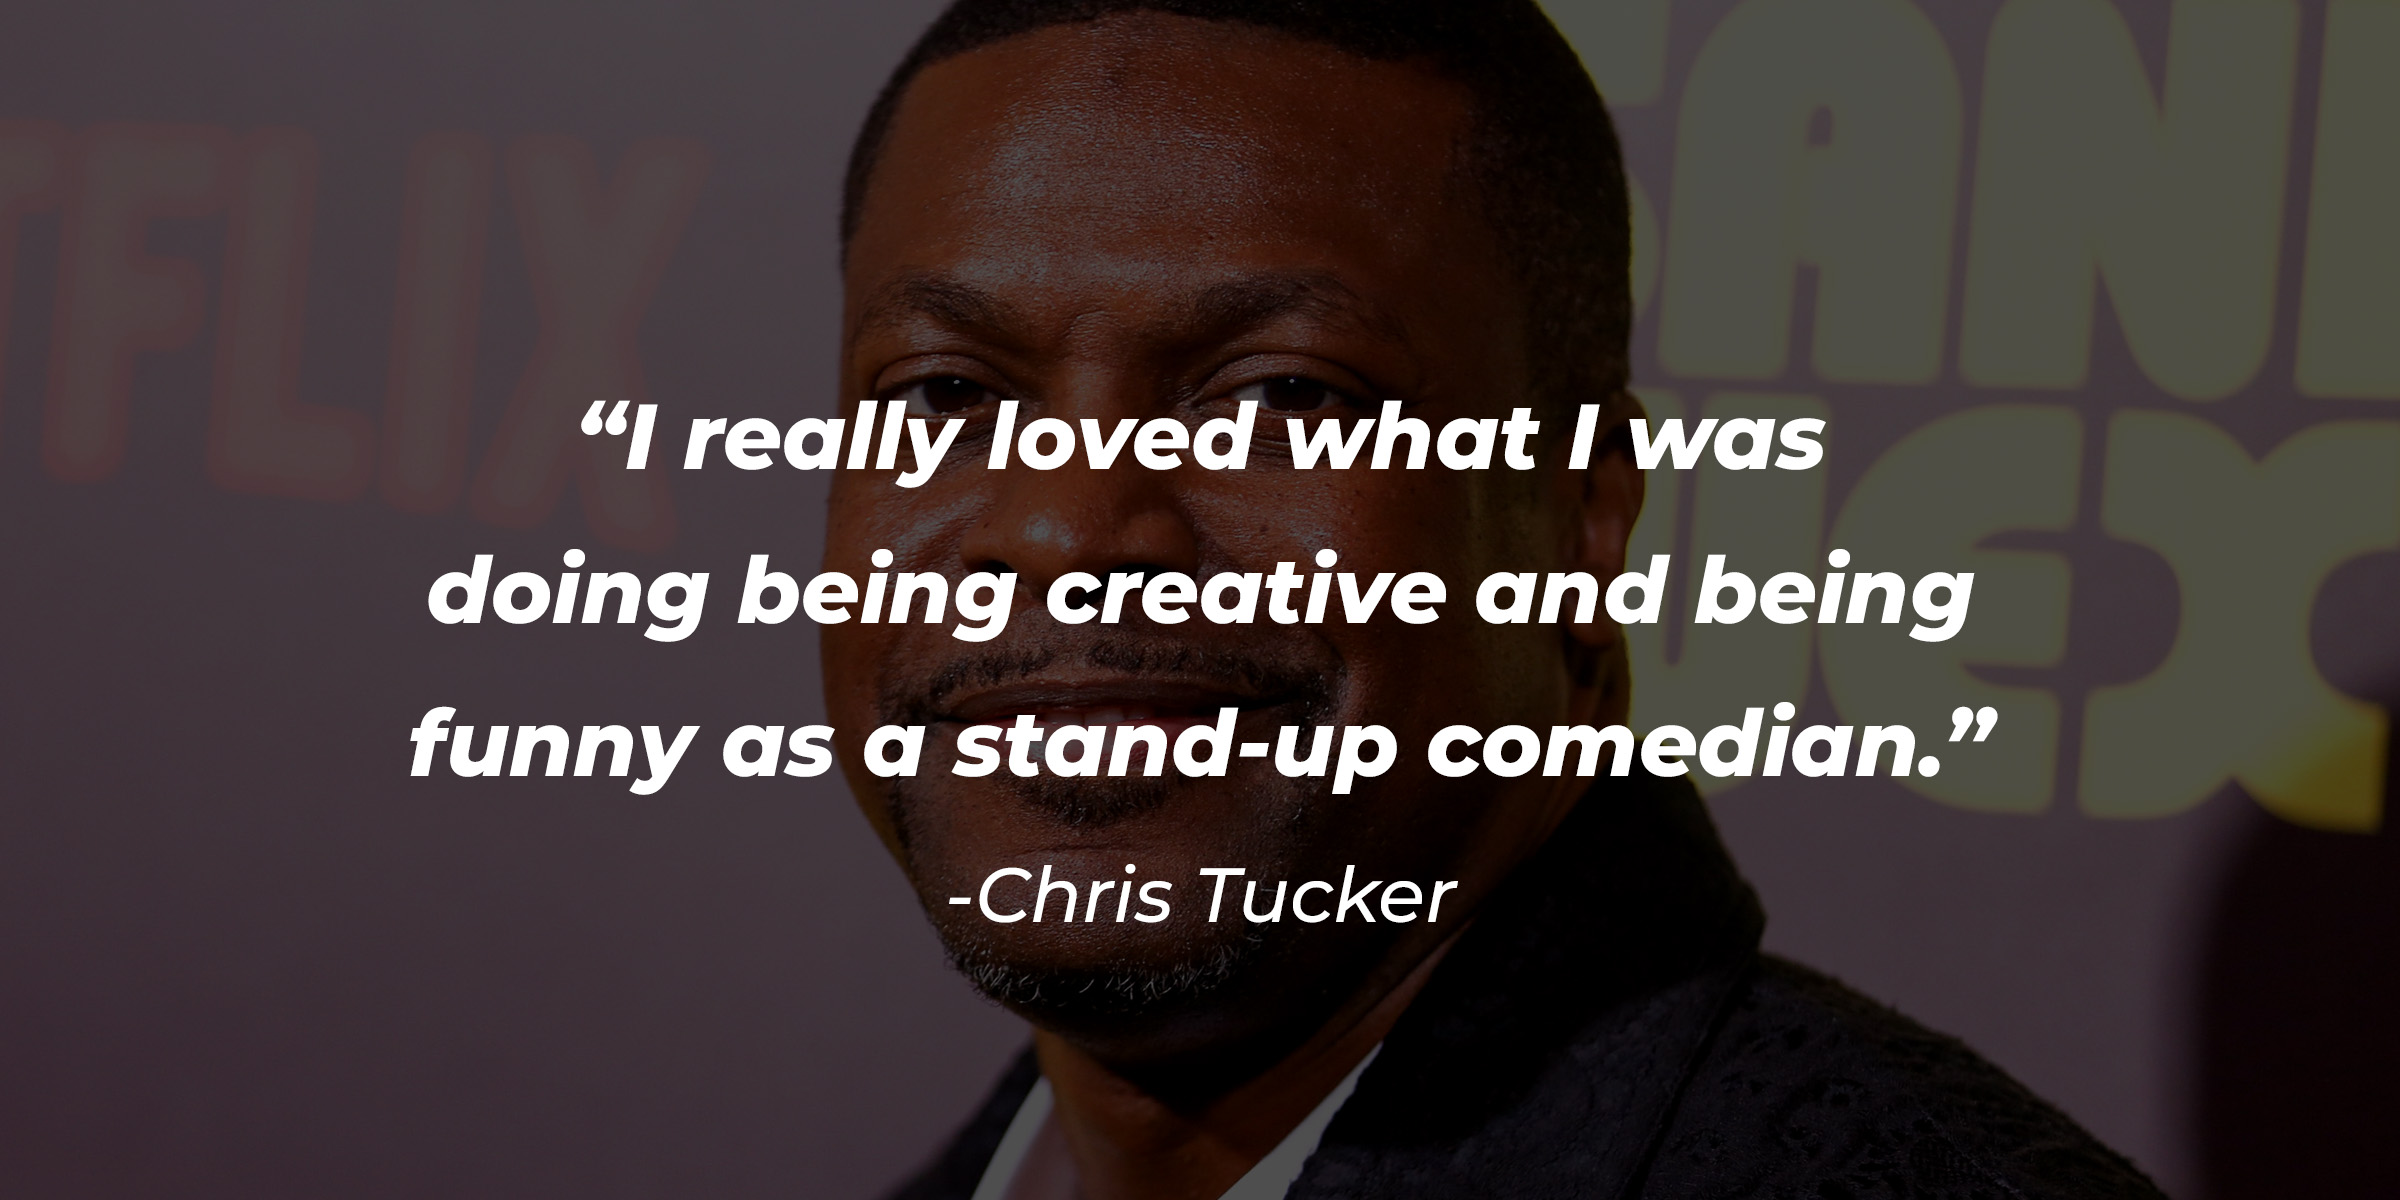 An image of Chris Tucker with his quote: “I really loved what I was doing being creative and being funny as a stand-up comedian.”┃Source: Getty Images